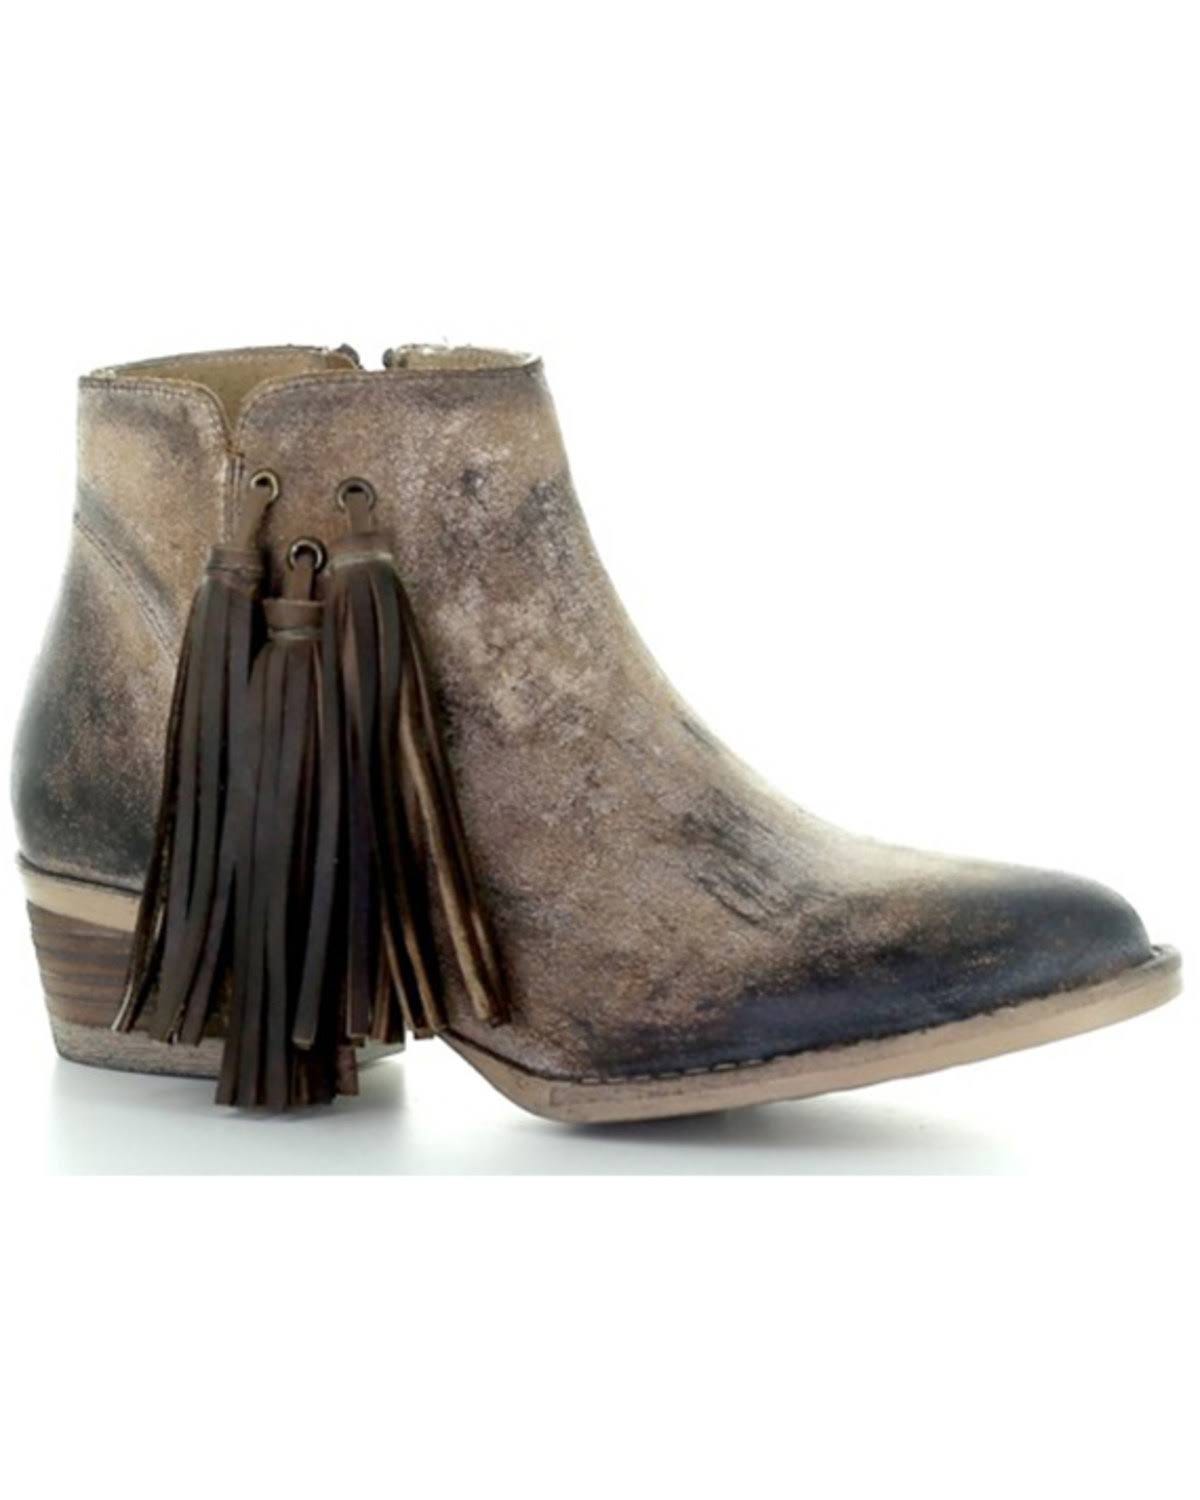 Western Style Fringe Bootie with Round Toe & Zipper Closure | Image